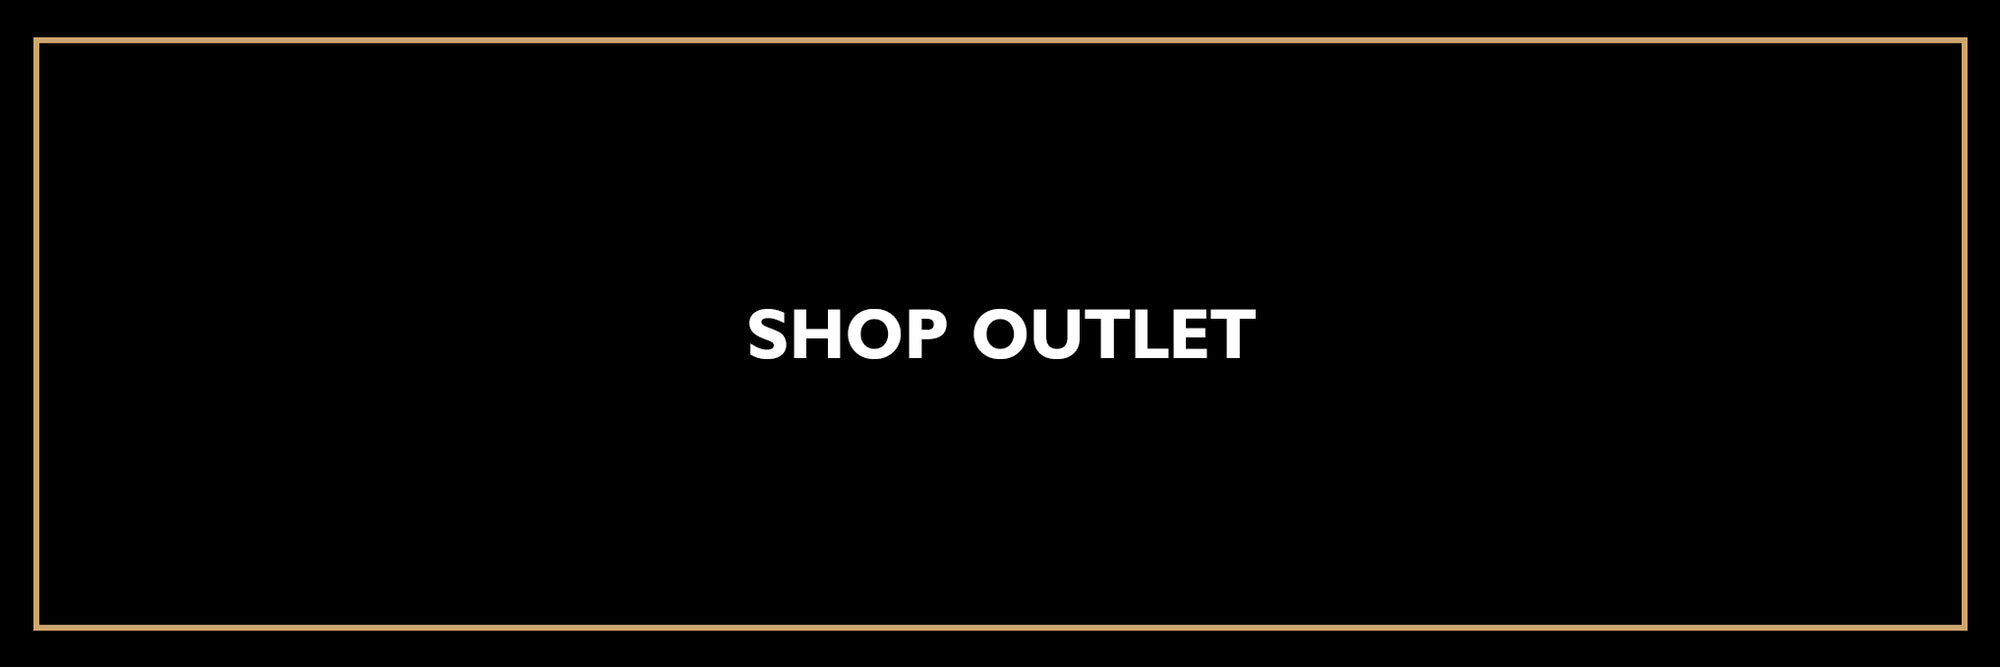 23/24 Cyber Monday - Outlet